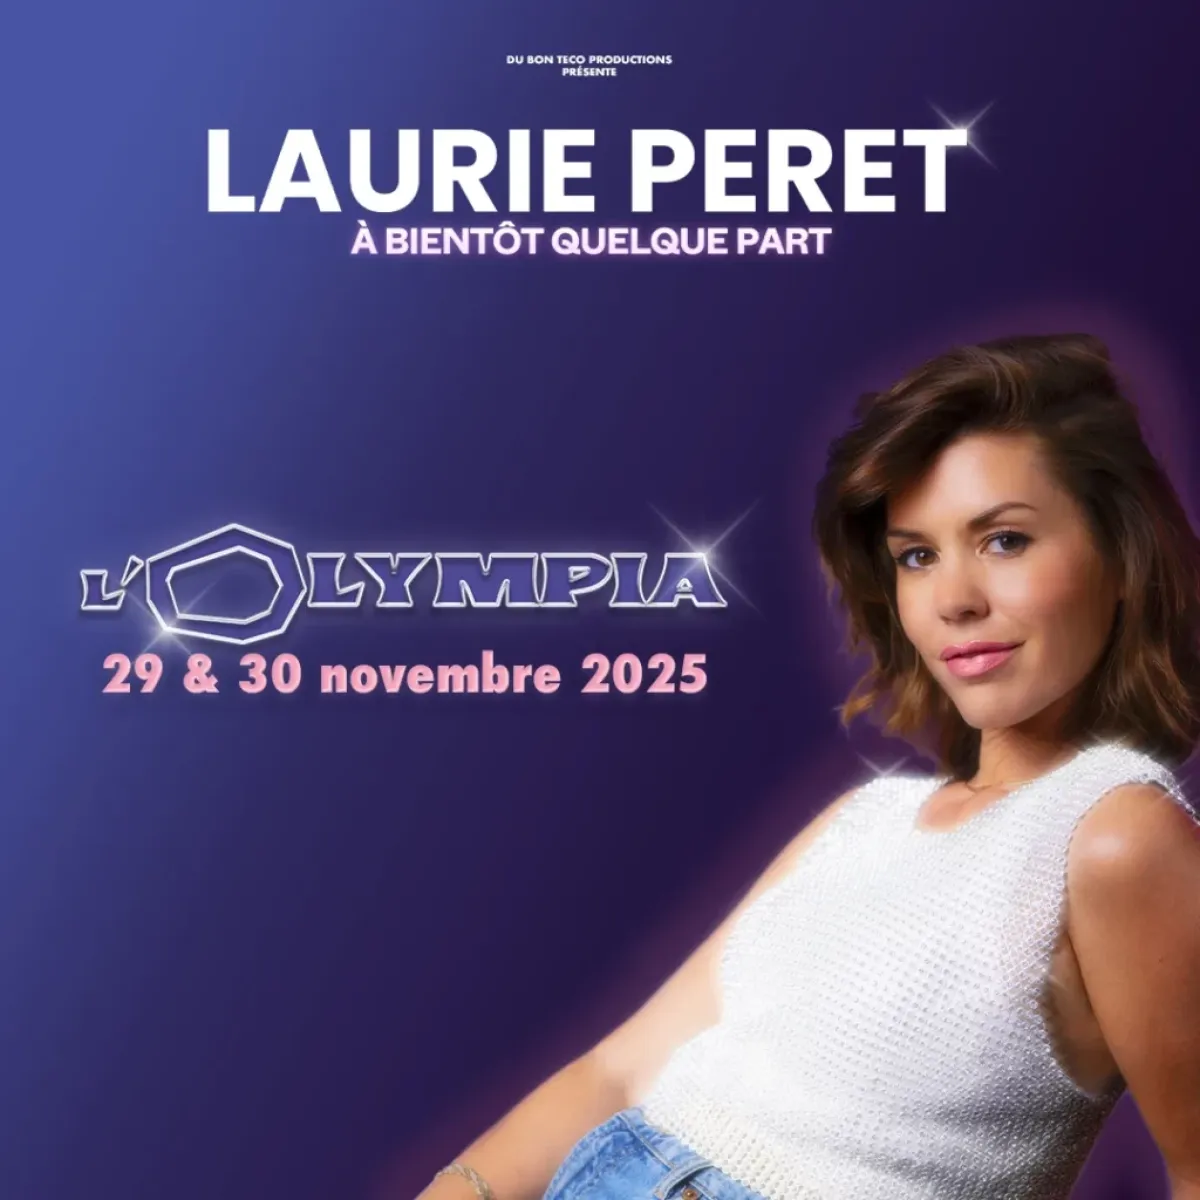 Laurie Peret - A Bientôt Quelque Part in der Olympia Tickets